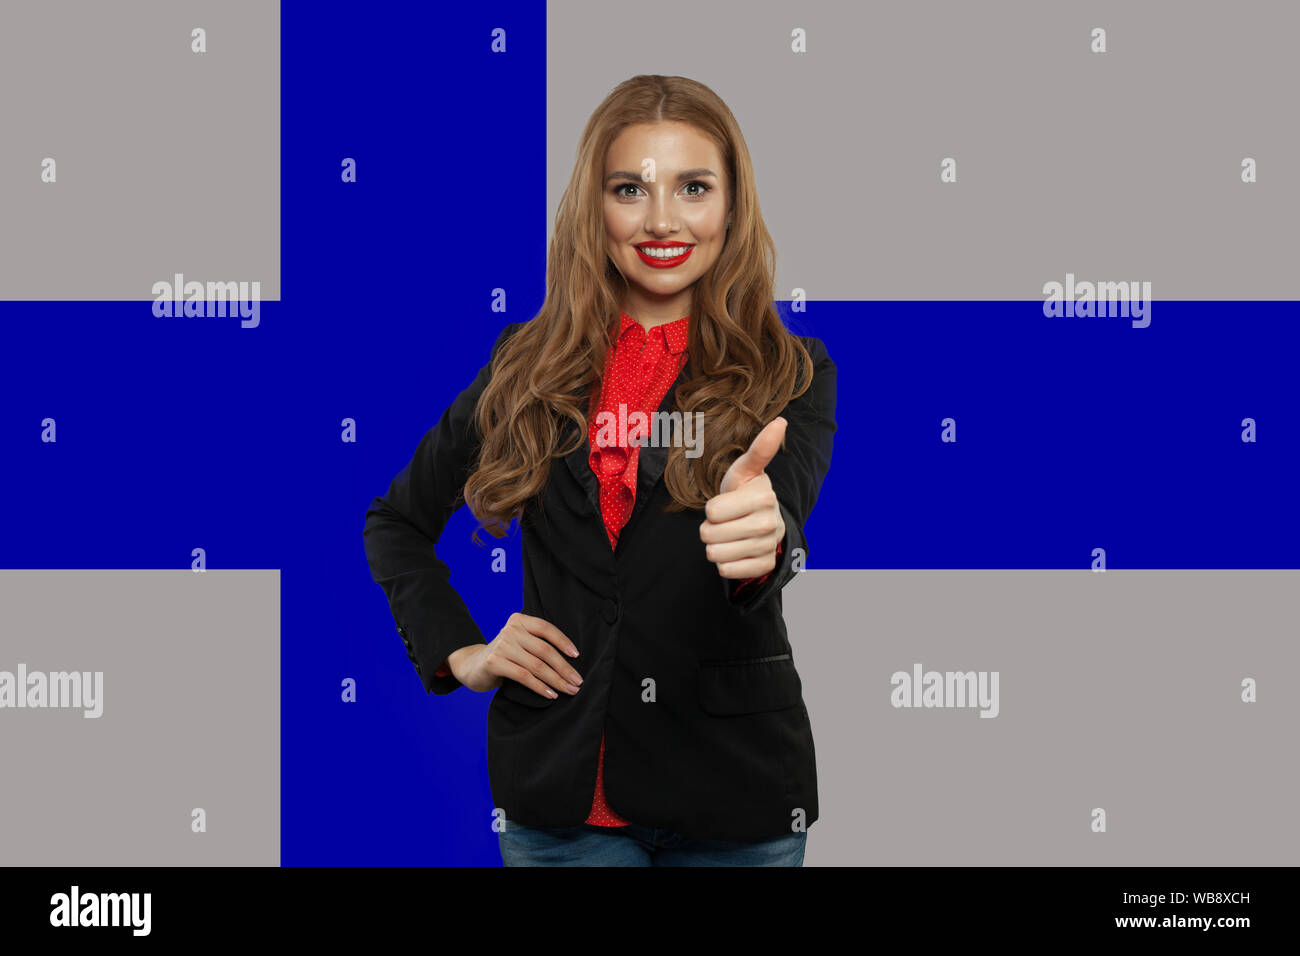 Finland. Young happy woman with thumb up against the Finnish flag background Stock Photo